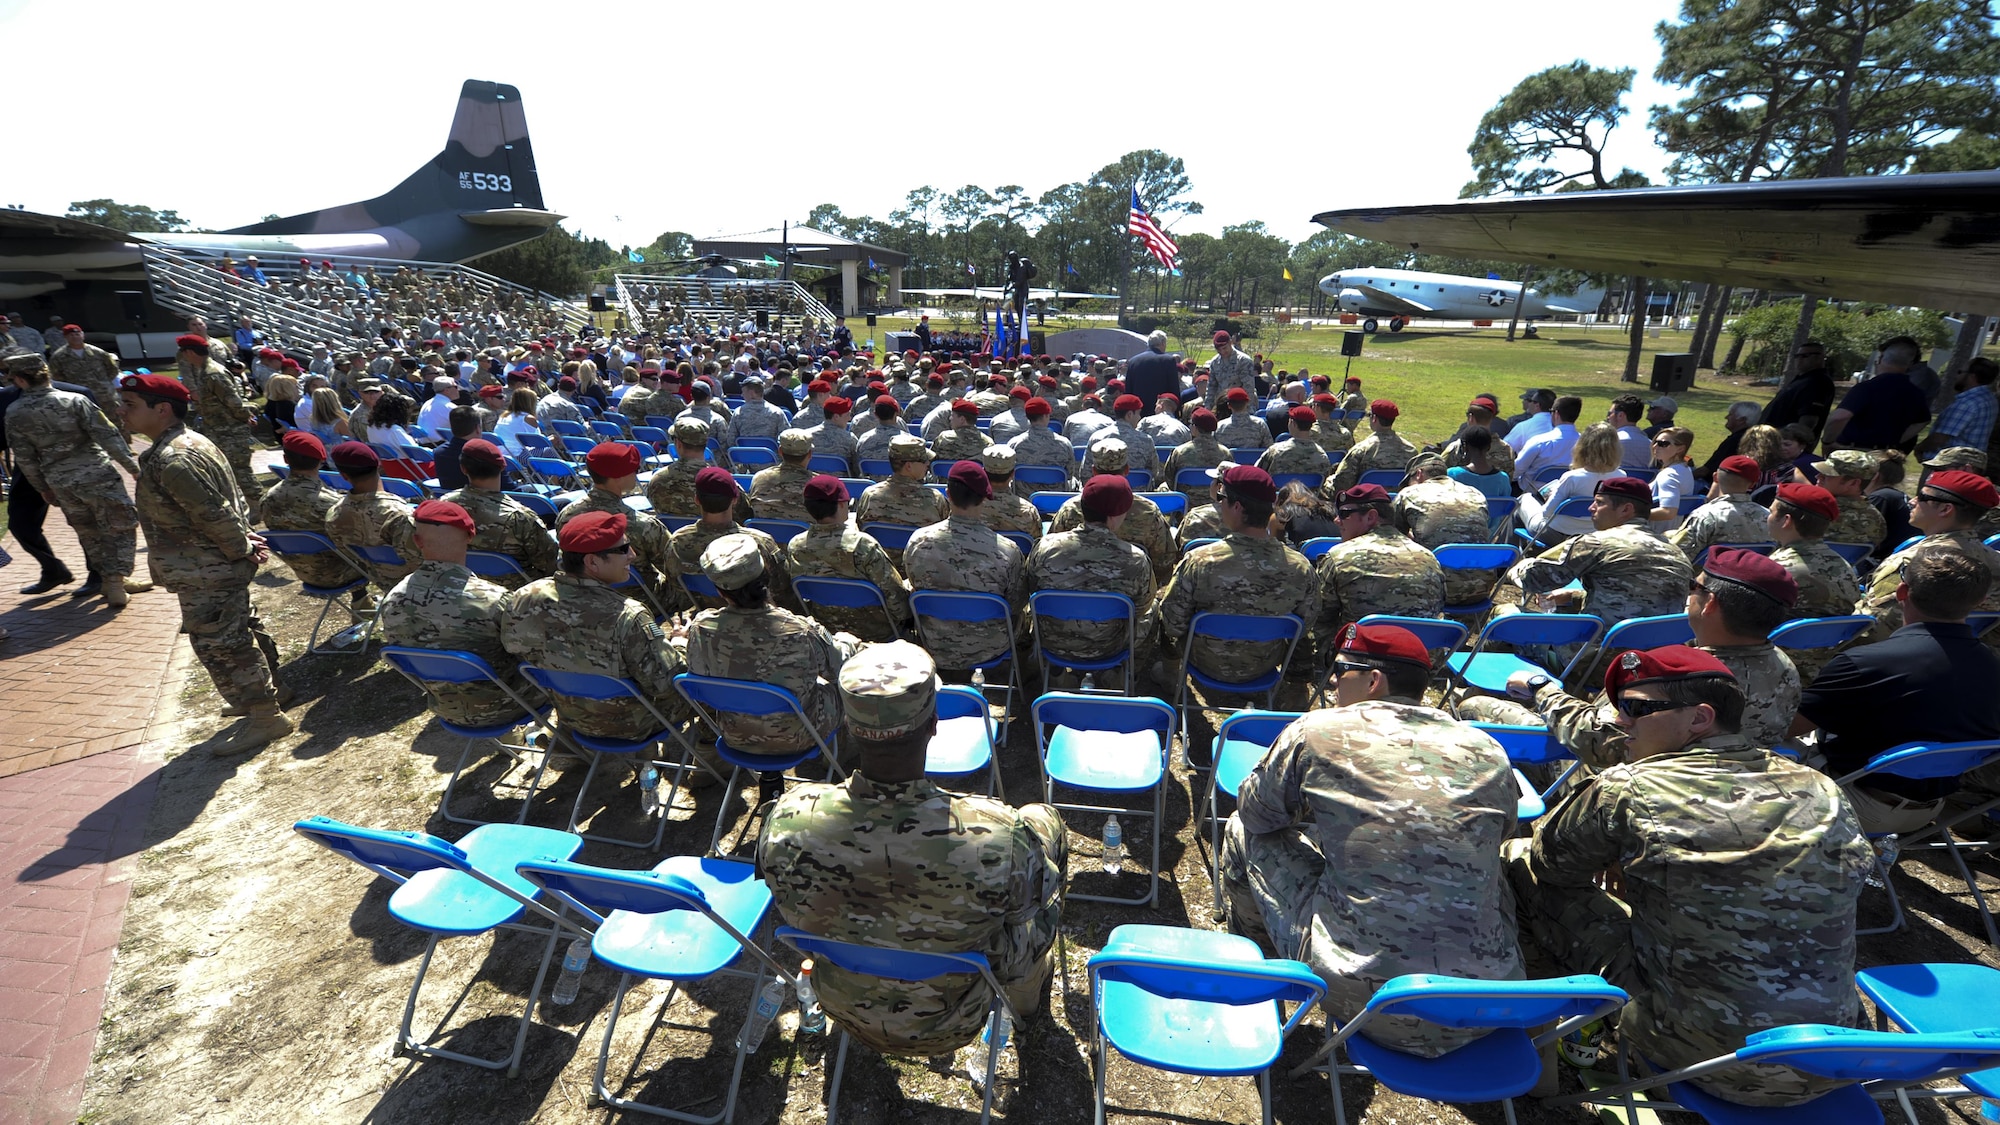 Hundred of Airmen attend a dual Air Force Cross ceremony on April 20, 2017, at Hurlburt Field, Fla. For the first time in Air Force history, two Airmen were simultaneously awarded the service’s highest medal for valorous action in combat.Master Sgt. (Ret.) Keary Miller, a retired Special Tactics pararescueman from the Air National Guard’s 123rd Special Tactics Squadron, and Chris Baradat, a combat controller since separated, both received Silver Star medals for their actions in combat, which were upgraded after a service-wide review.(U.S. Air Force photo Airman 1st Class Dennis Spain)